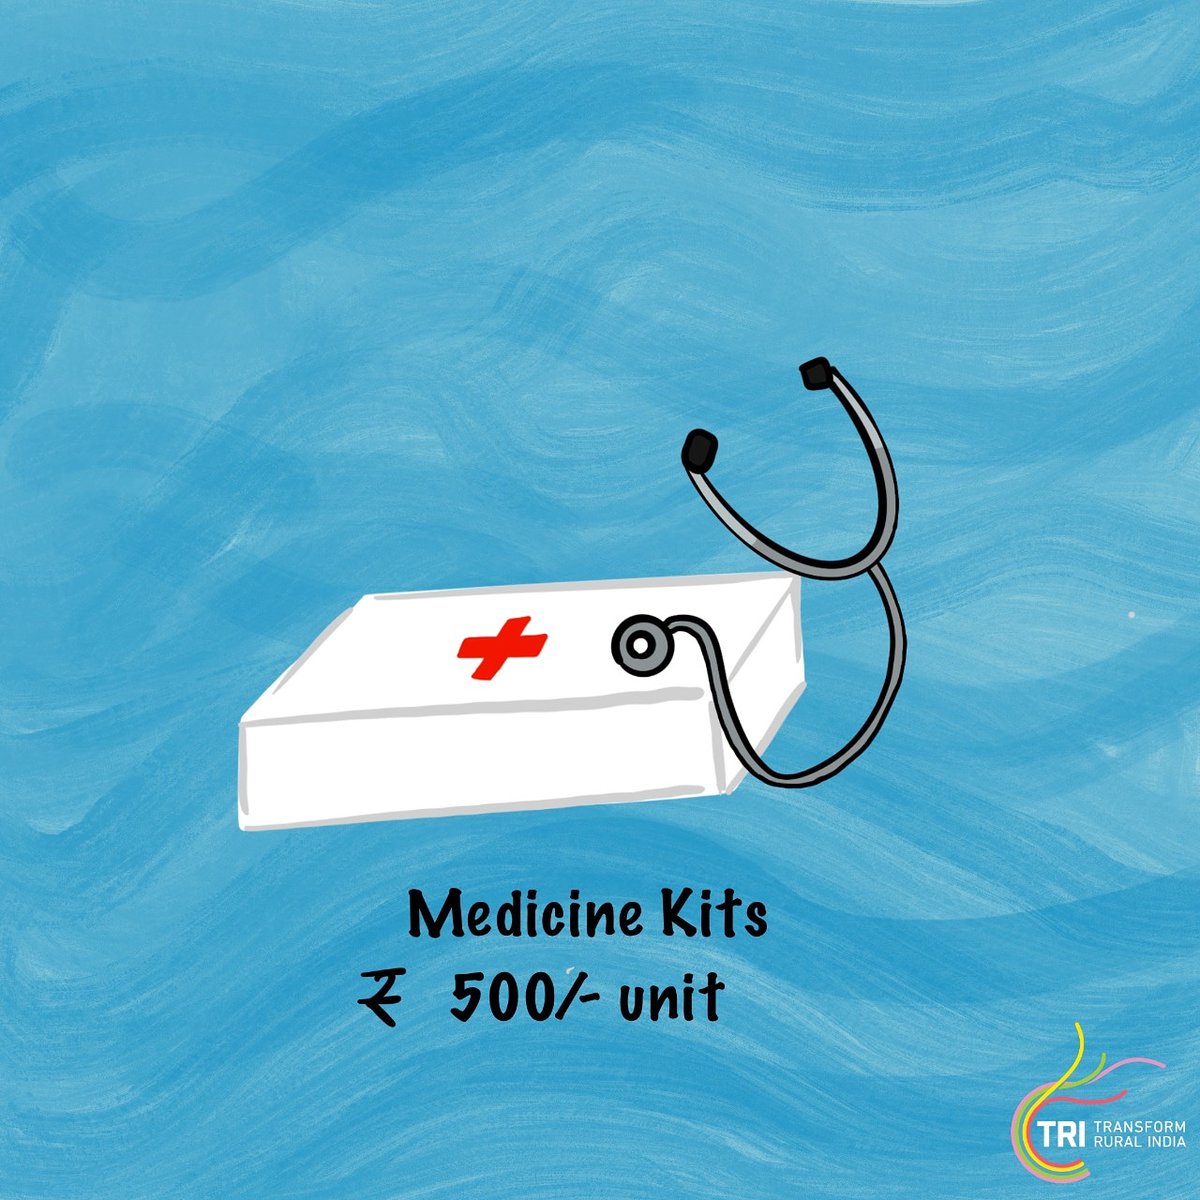 Even though we can't hold hands right now, we can come together to provide essential #medicine kits in #rural India. 

#HelpRuralIndiaBreathe 
#RuralIndiaCombatsCOVID 
#ContributeToRuralIndia 

Artwork by @Sowmya_M98 

Donate now trif.in/donate/